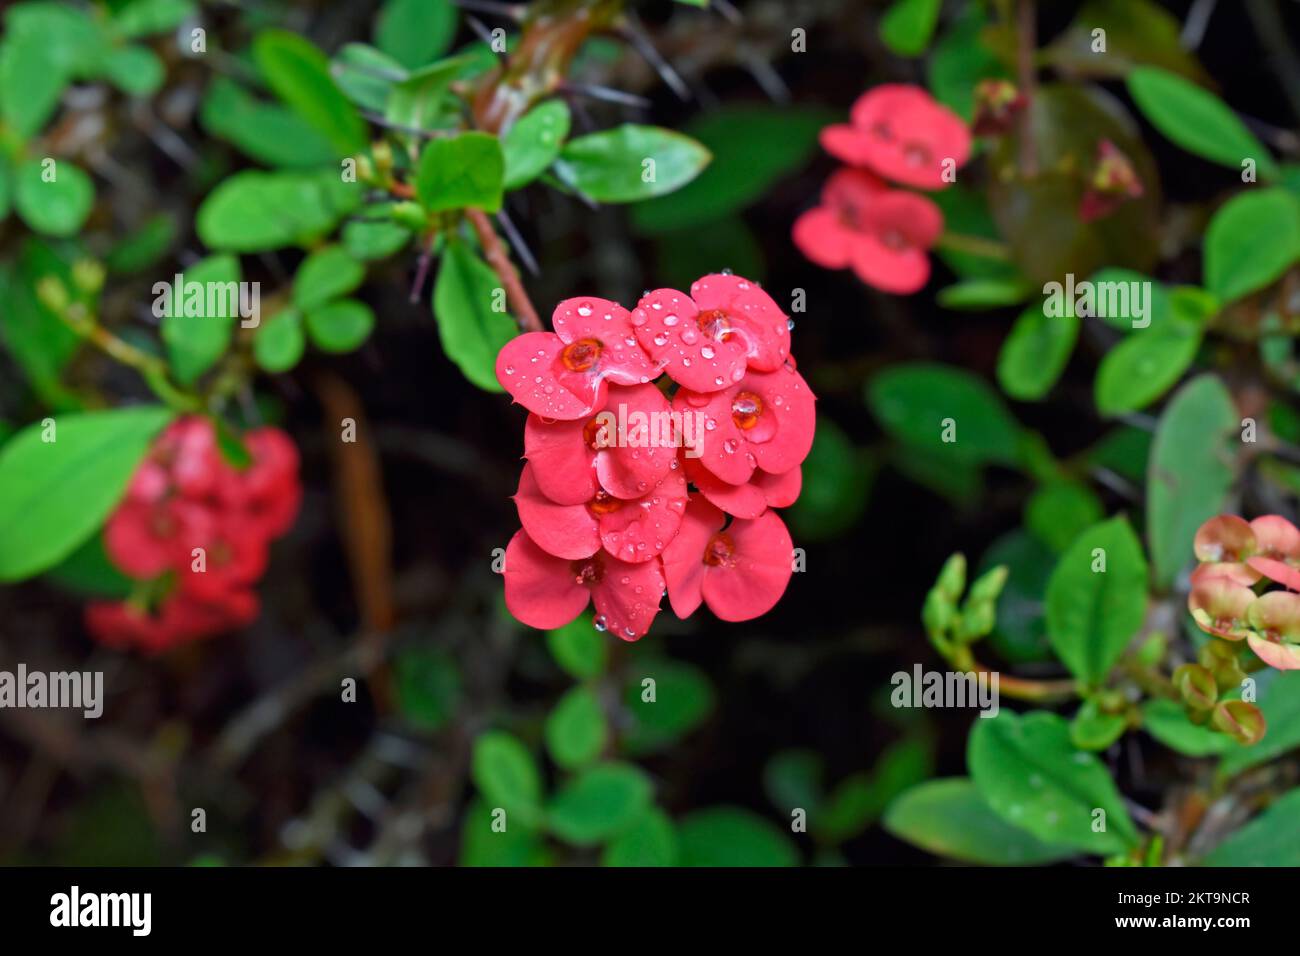 Red Crown of Thorns or Christ Thorn flowers (Euphorbia Milli) on garden Stock Photo